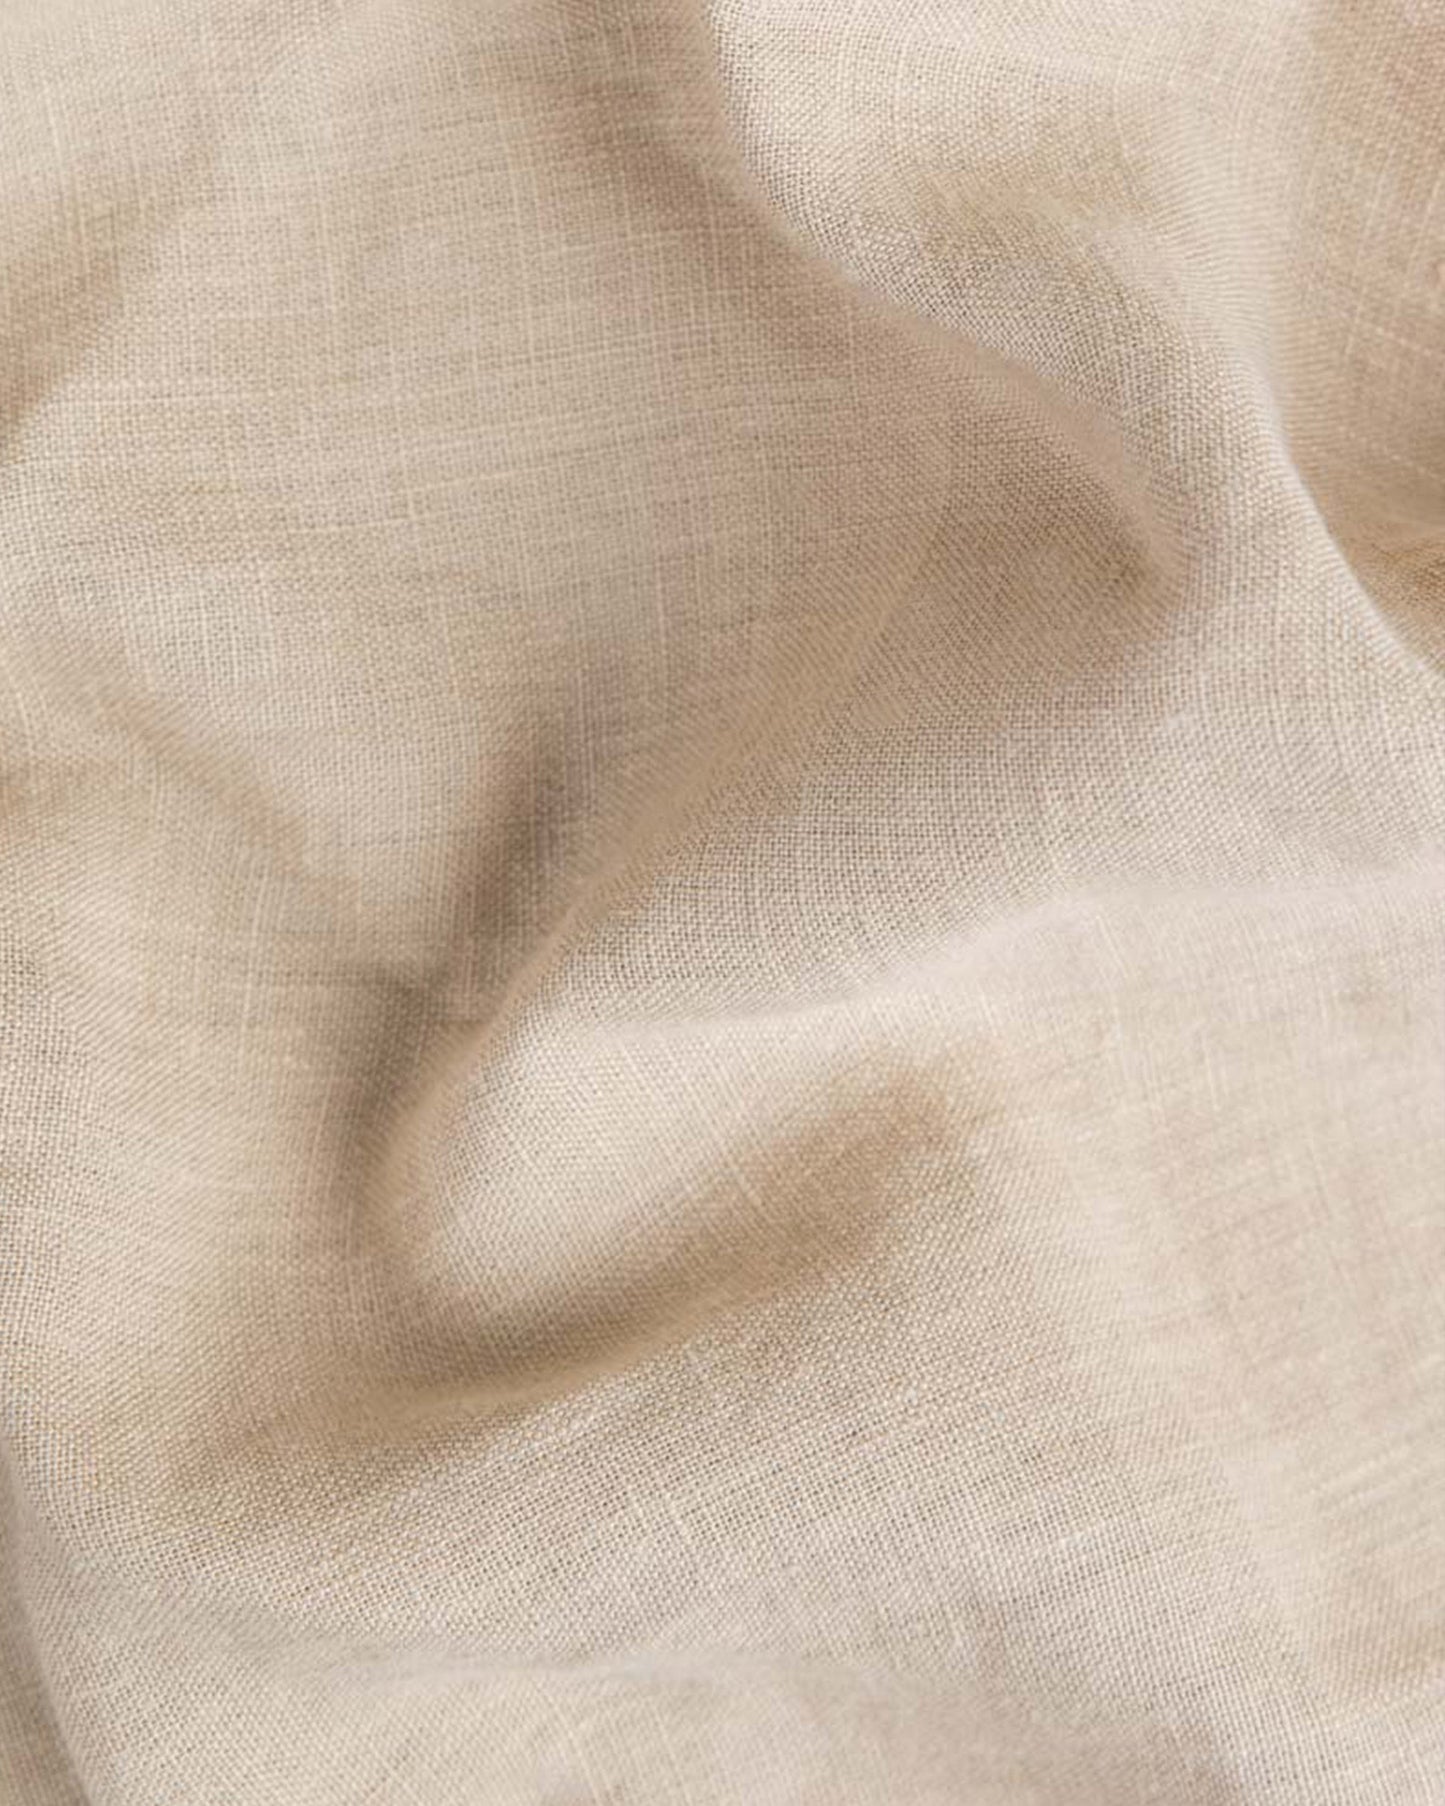 Round linen tablecloth in Ivory - MagicLinen